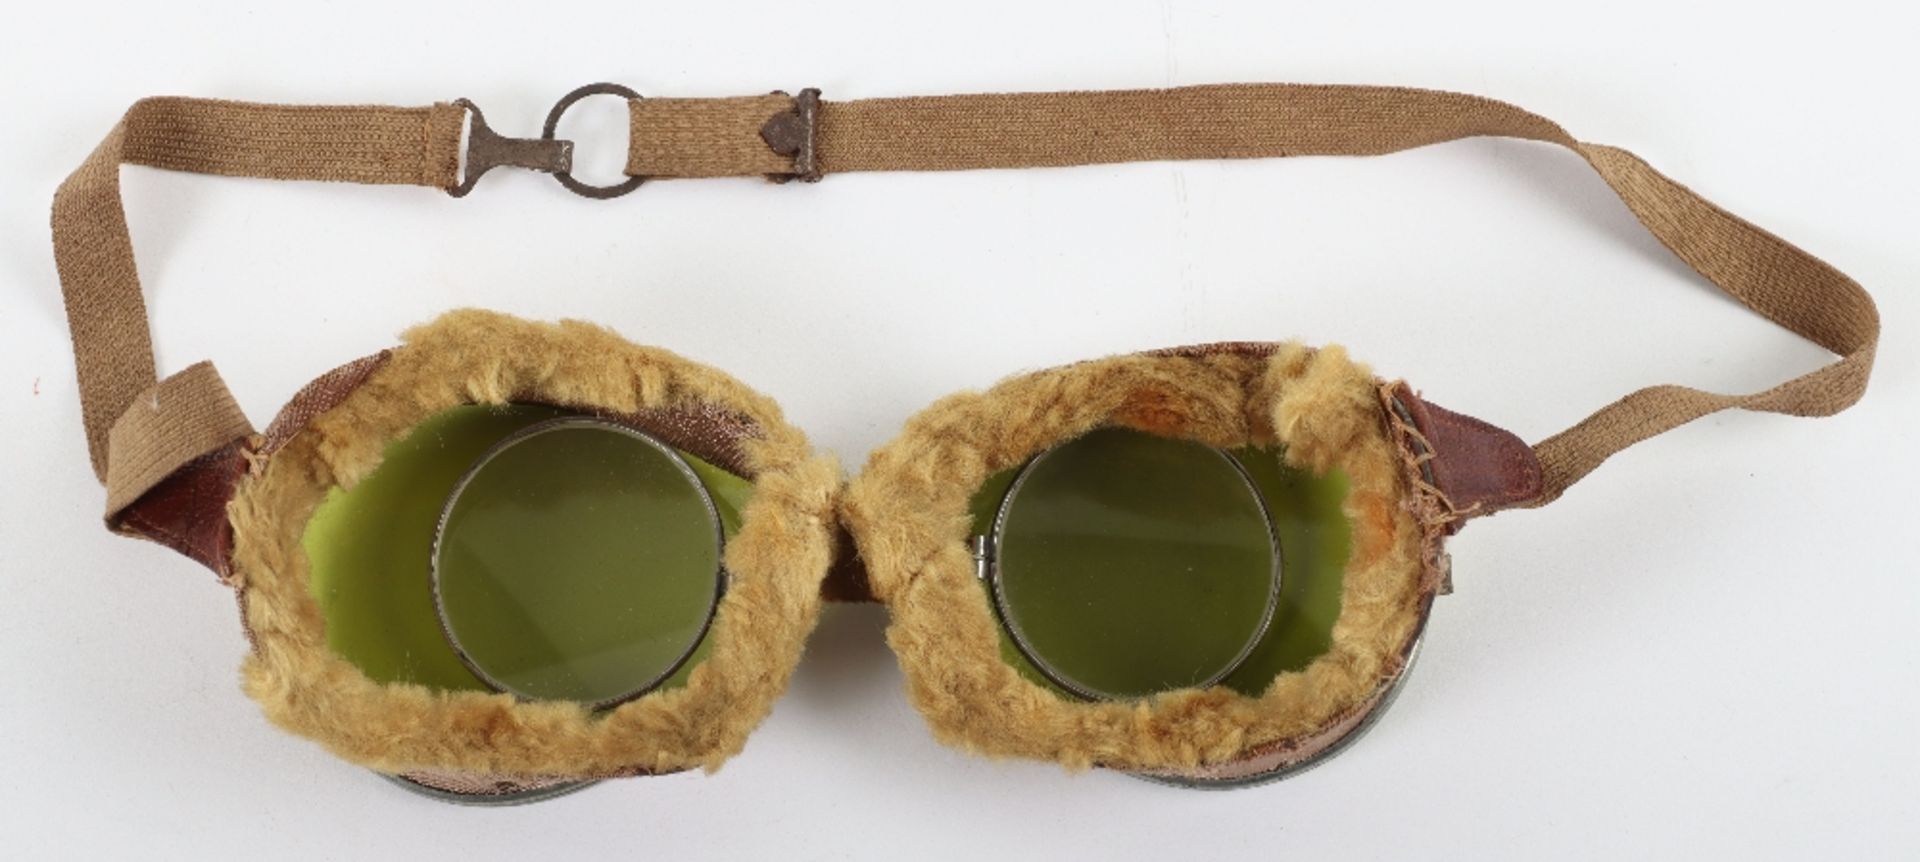 Unusual Pair of Early Aviators Goggles - Image 4 of 5